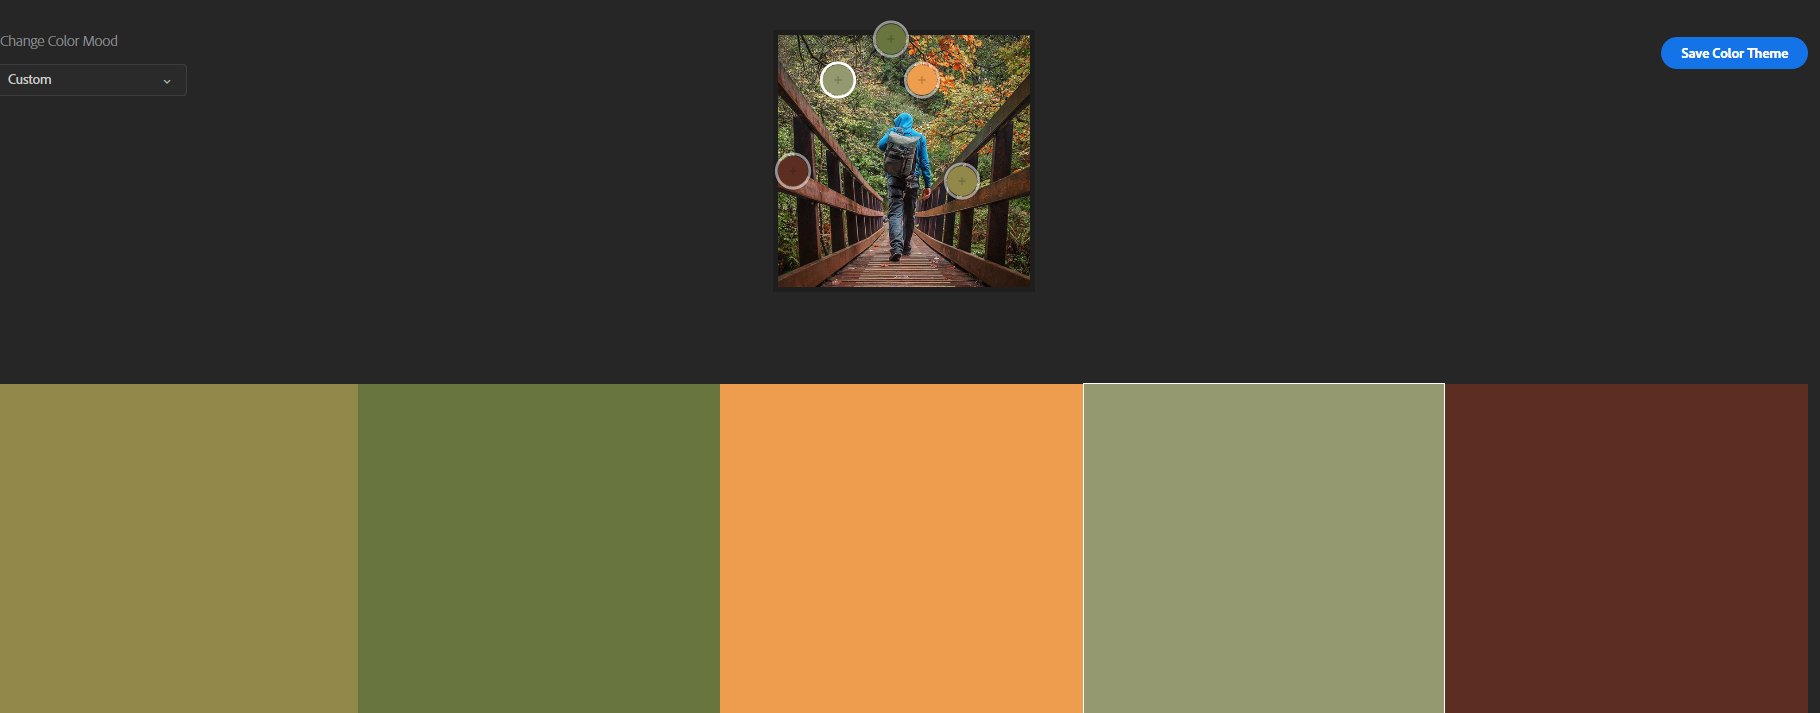 Many variations for a colour pallette came together. AN Earthy tone was designed